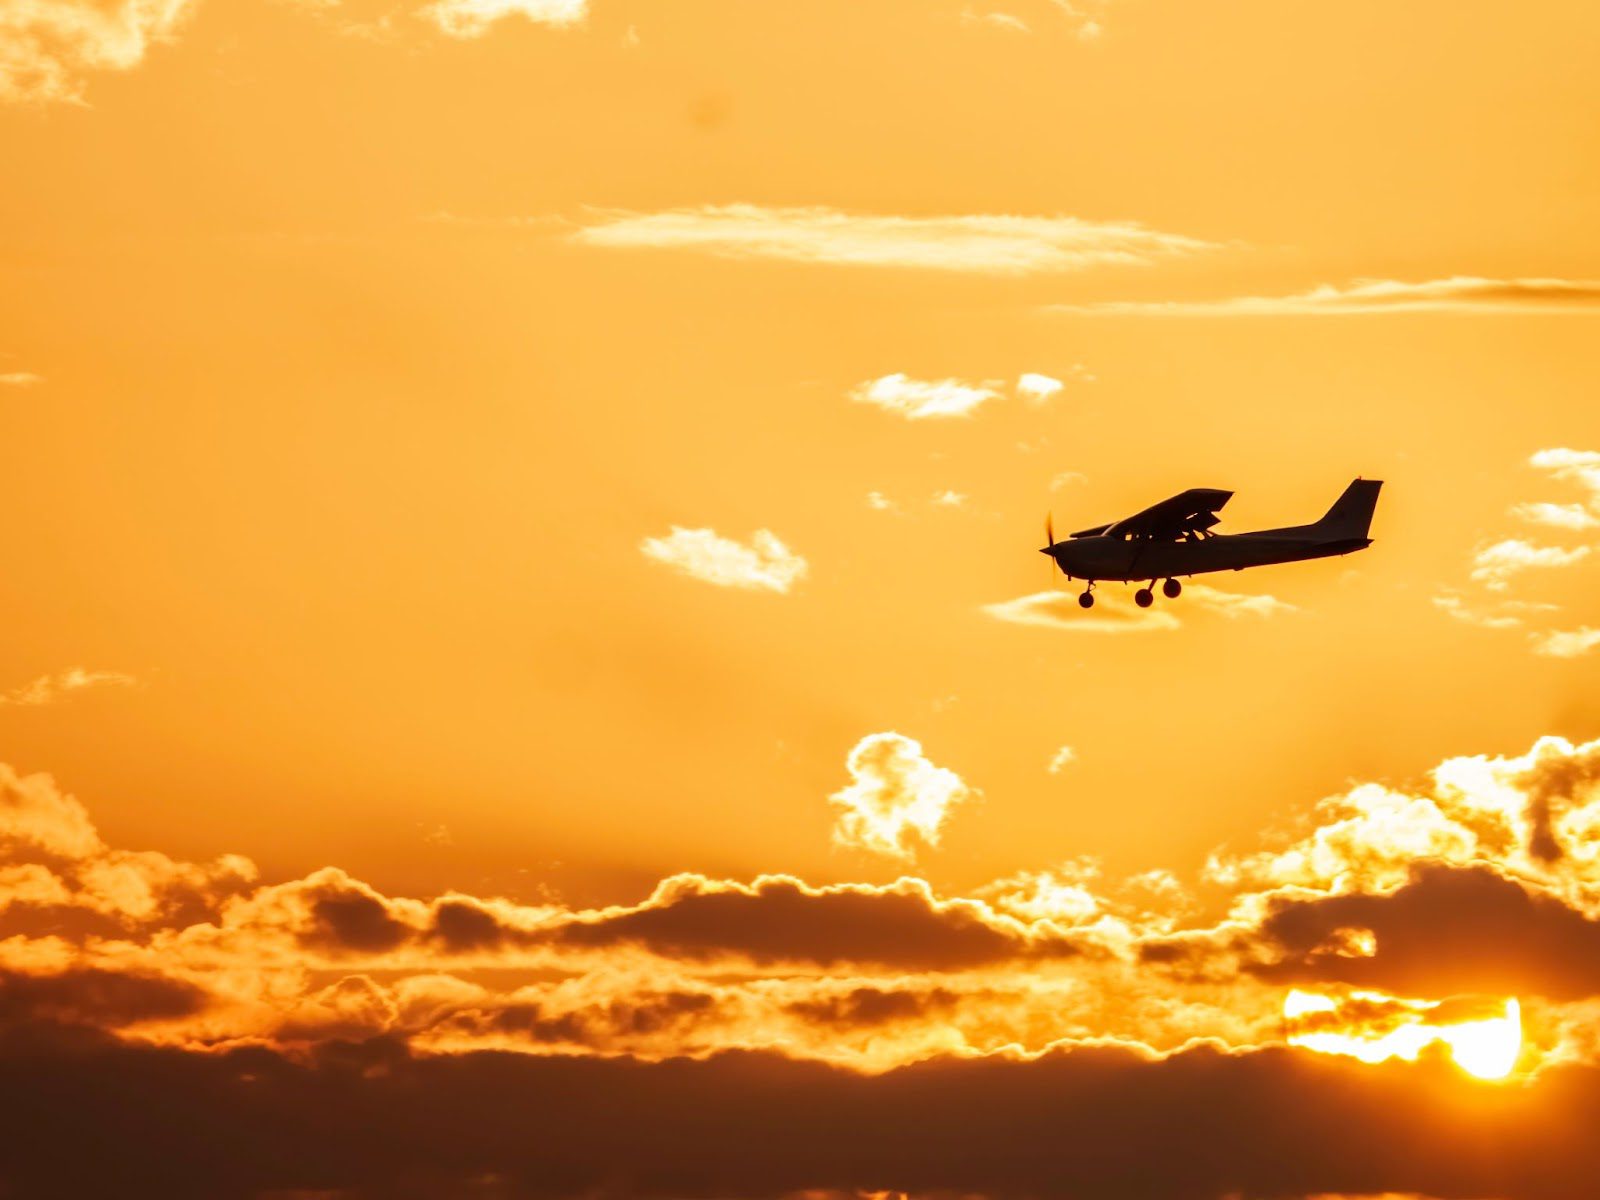 Varying sunlight has a major impact on the temperature of an aircraft’s instruments, which in turn impacts an instrument’s dark current.